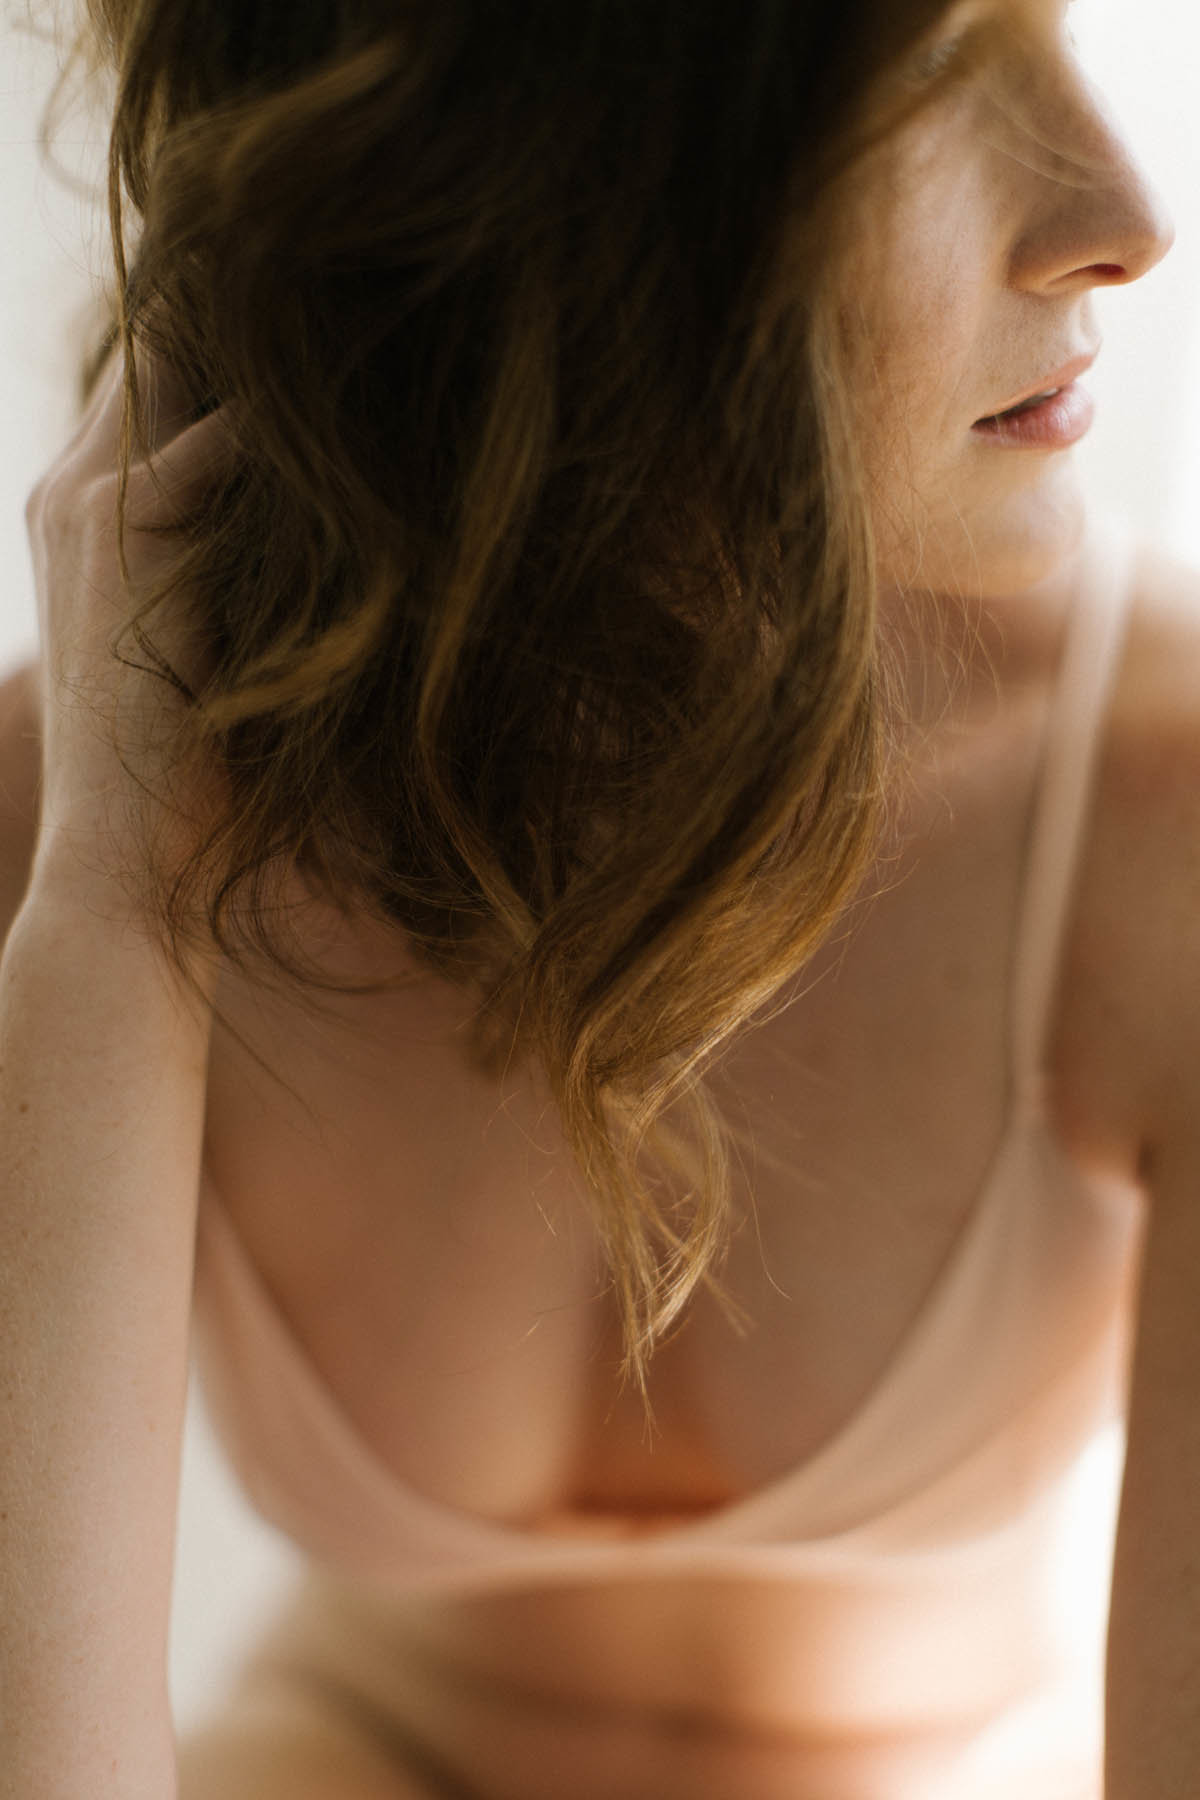 Woman with peach lingerie during boudoir session